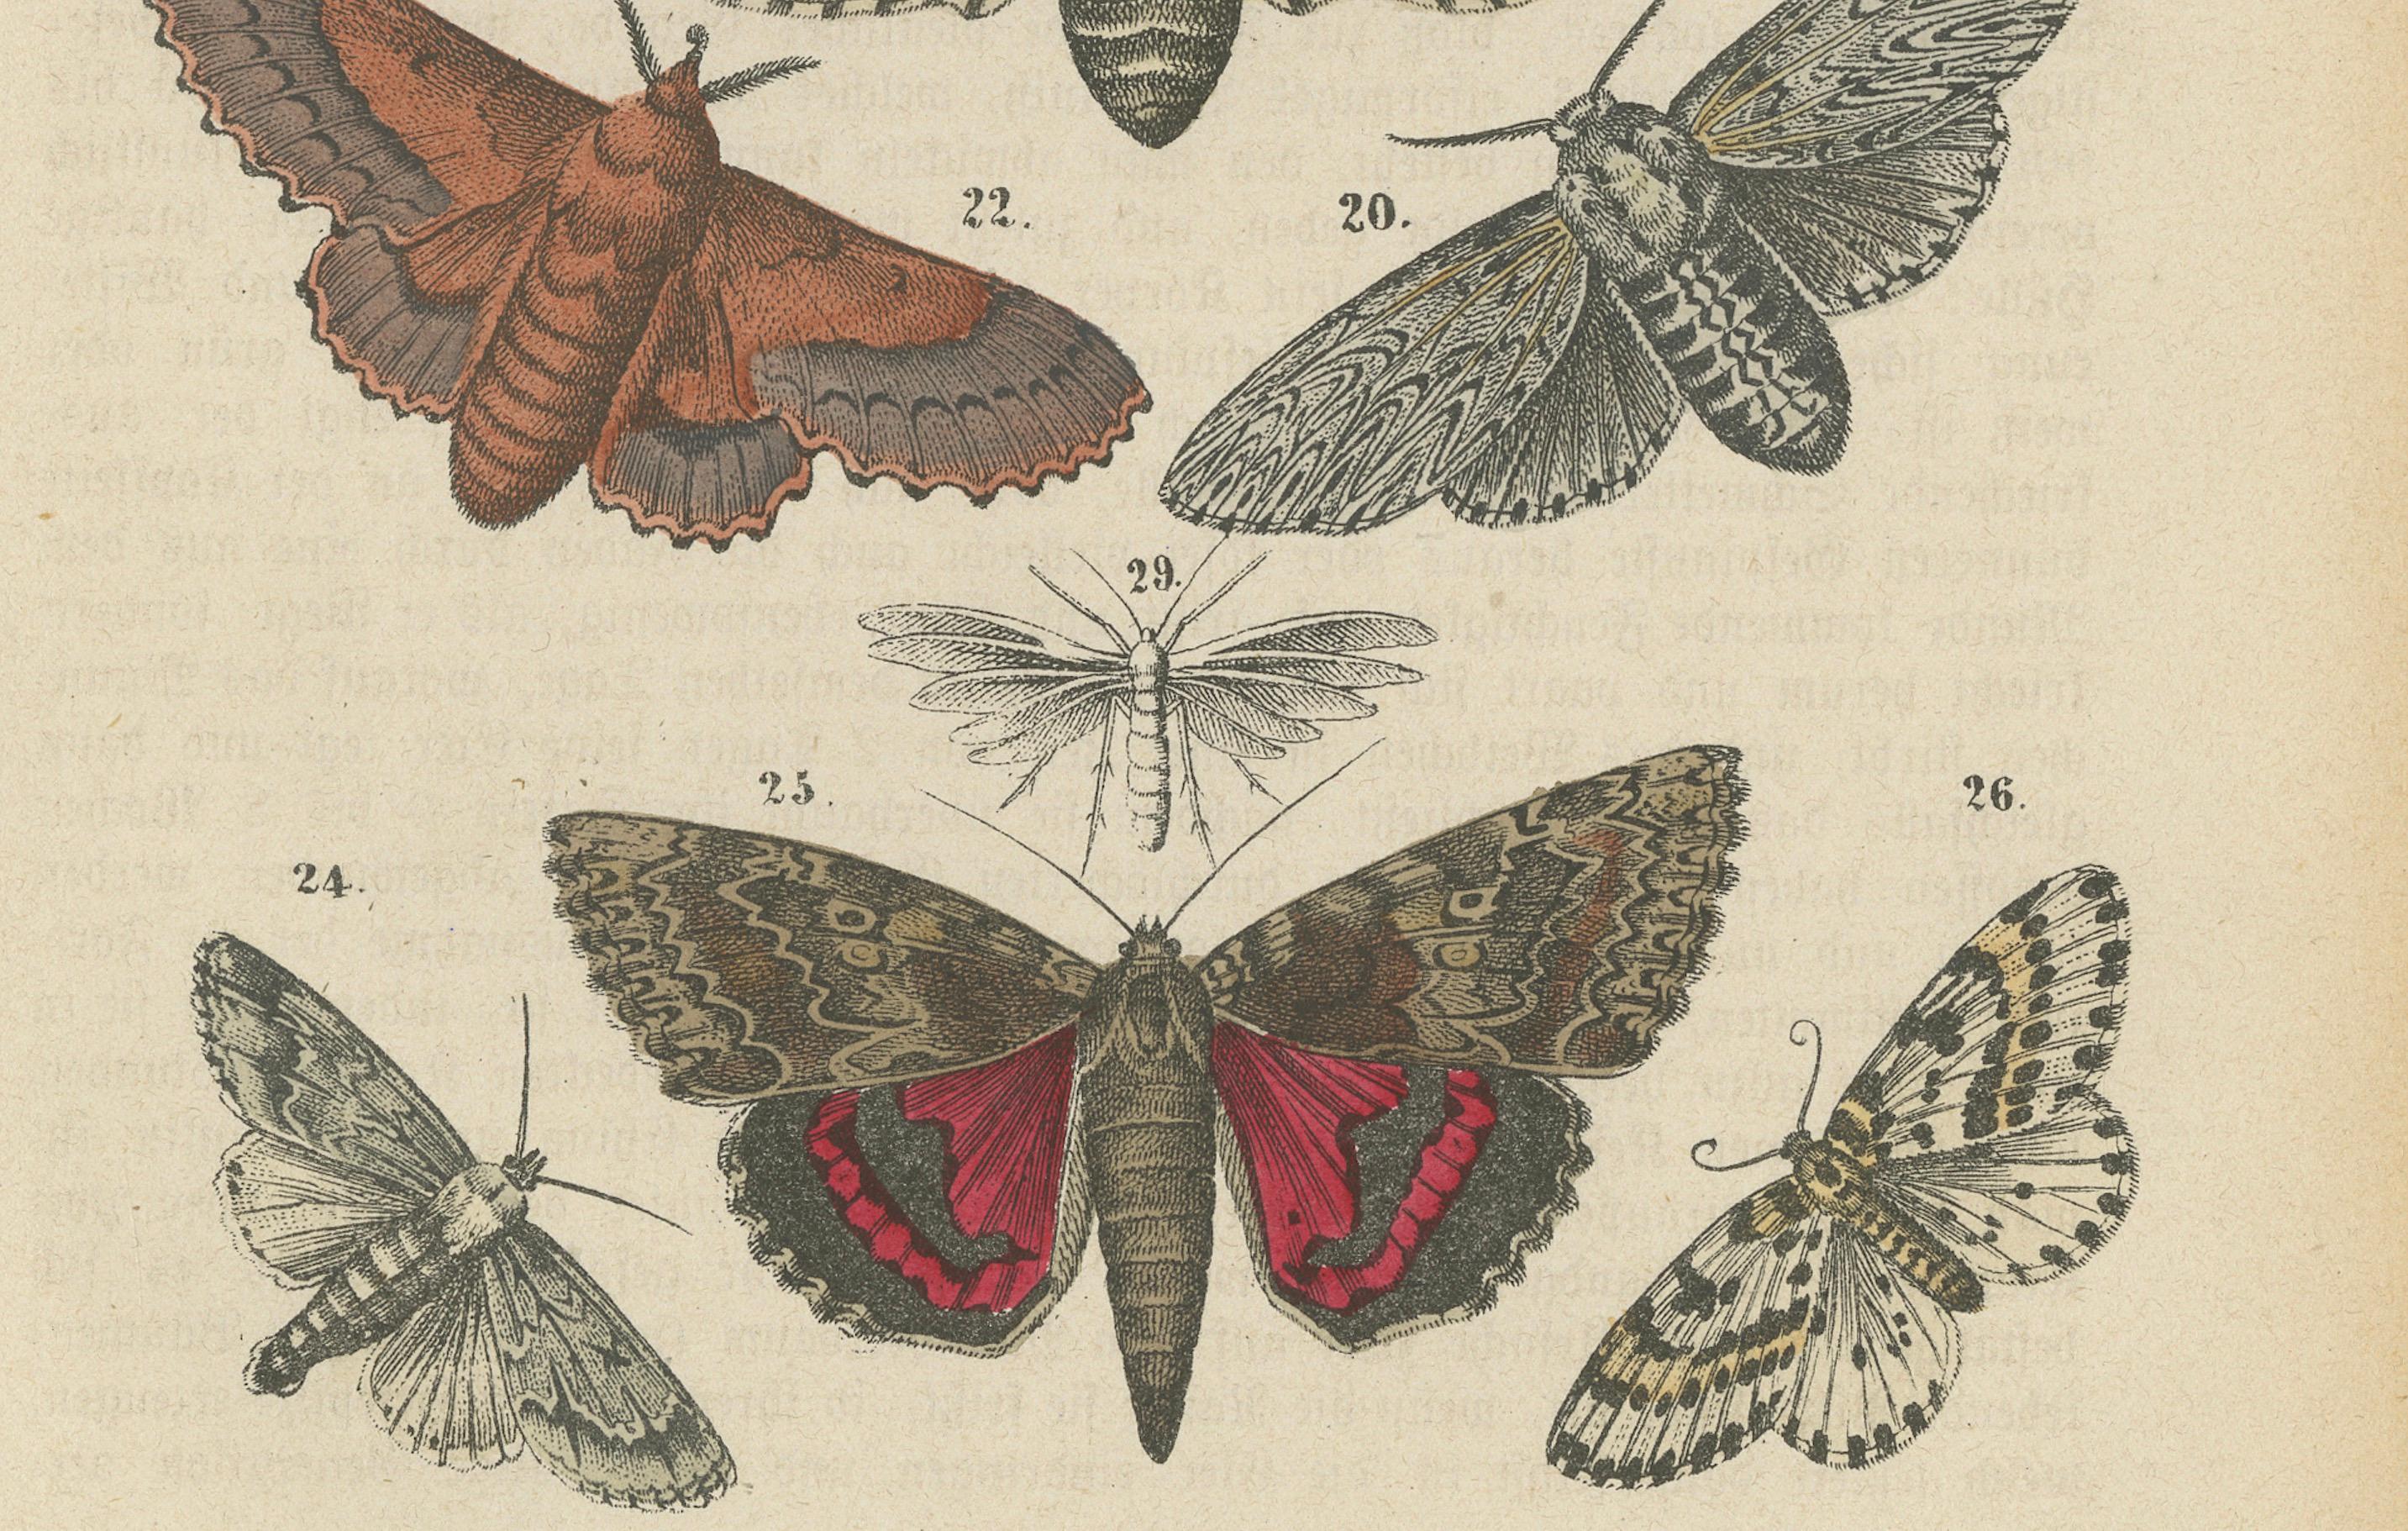 A hand-colored illustration of various insect species, created around 1866. 

Th print is potentially part of a publication by W. G. Sebald, a well-known German writer, also known as Max Sebald. He was an avid collector of art and had an interest in